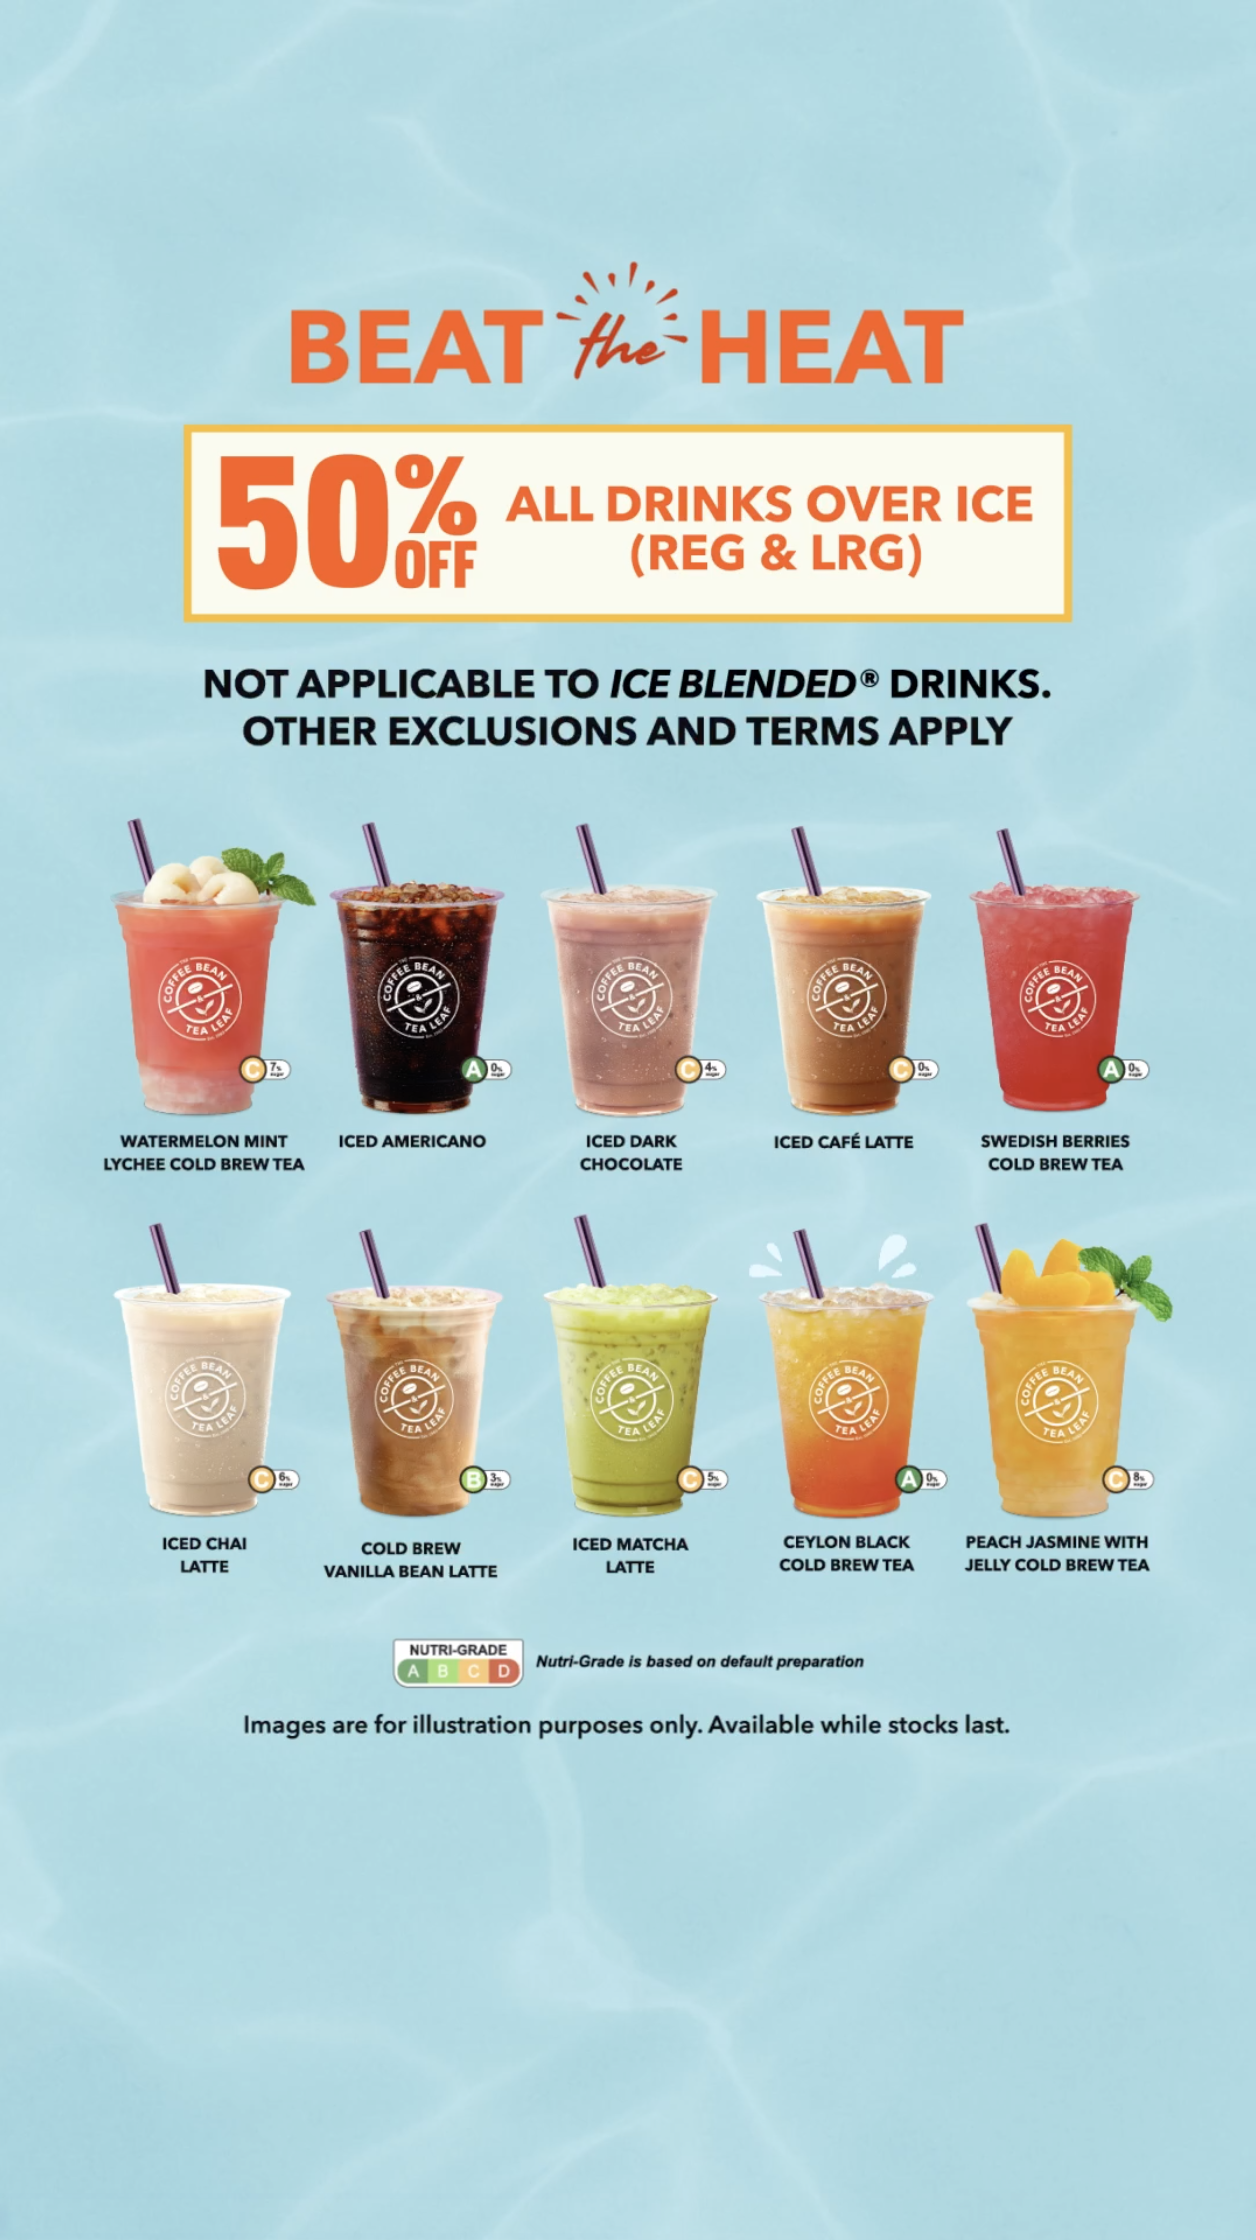 Lobang: The Coffee Bean & Tea Leaf offering 50% off your favourite iced beverages from 8 Apr 24 - 5